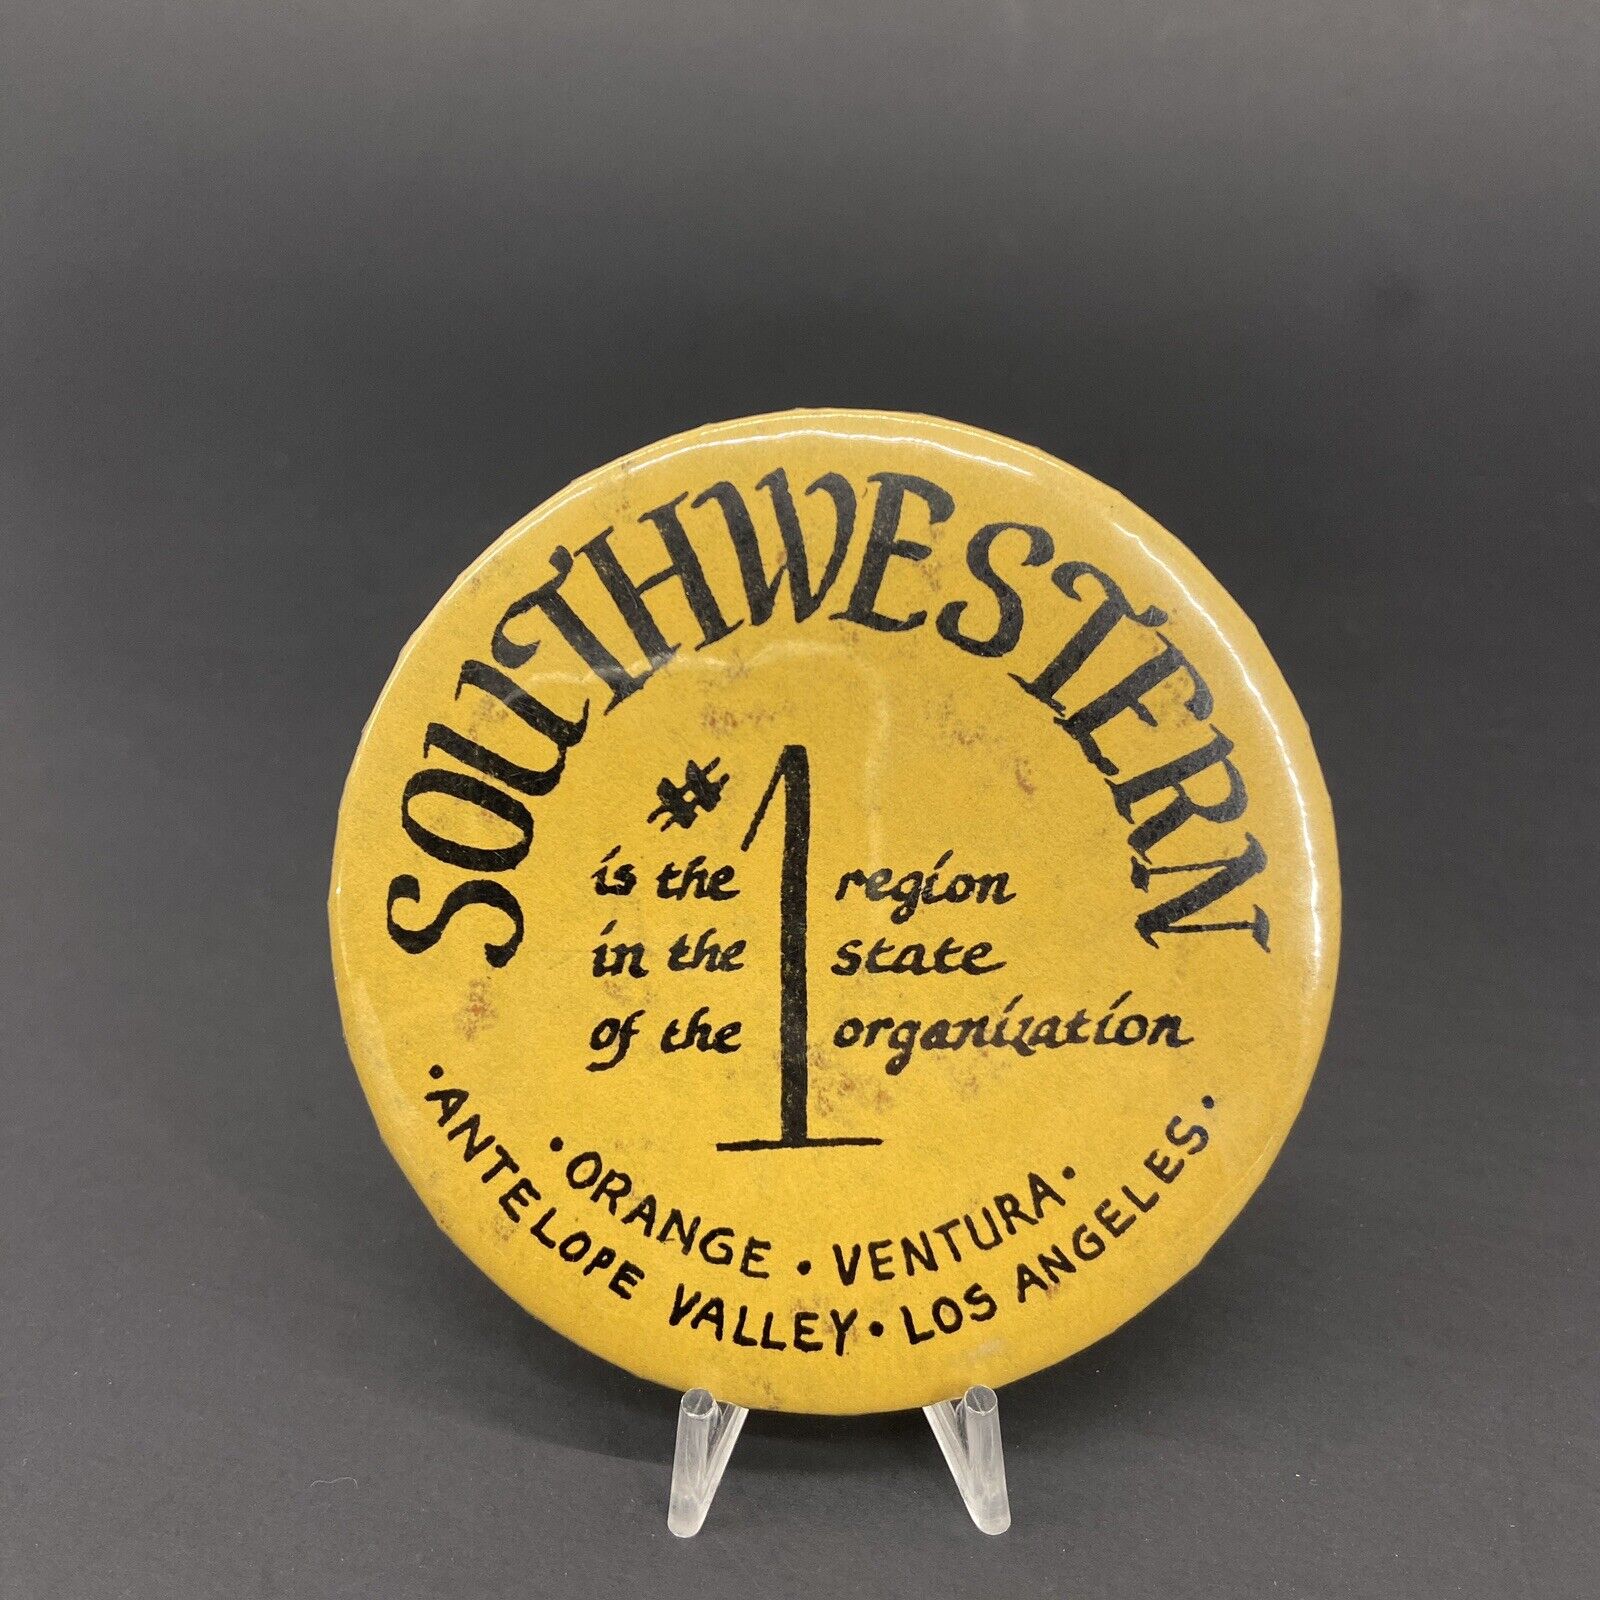 Southwestern Is #1 In The Region Vintage 1970s 1980s 4h FFA Pinback Button Pin